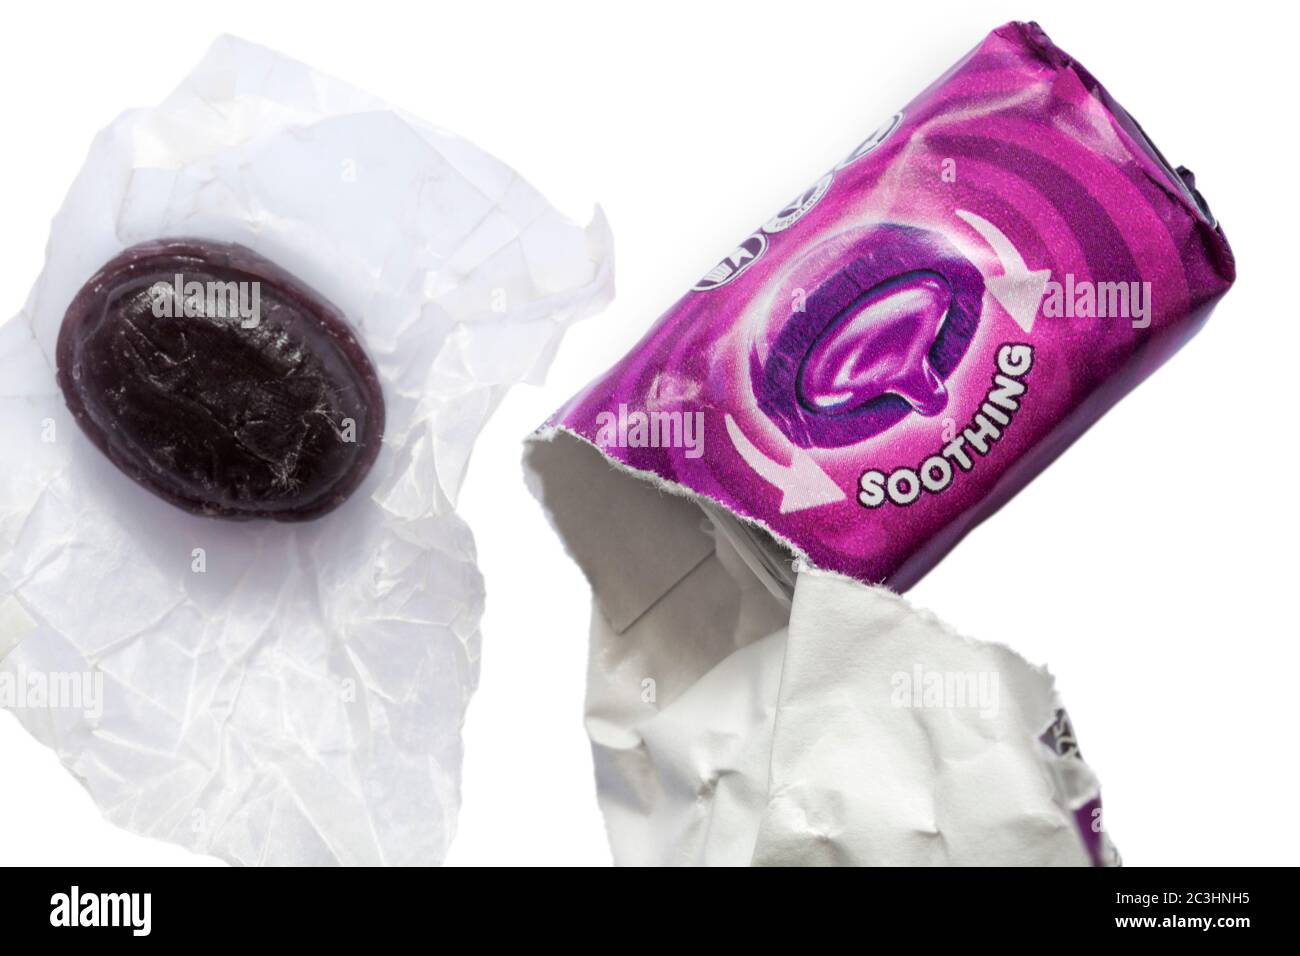 soothing Halls Soothers sweets blackcurrant flavour with sweet removed from packet and unwrapped set on white background Stock Photo